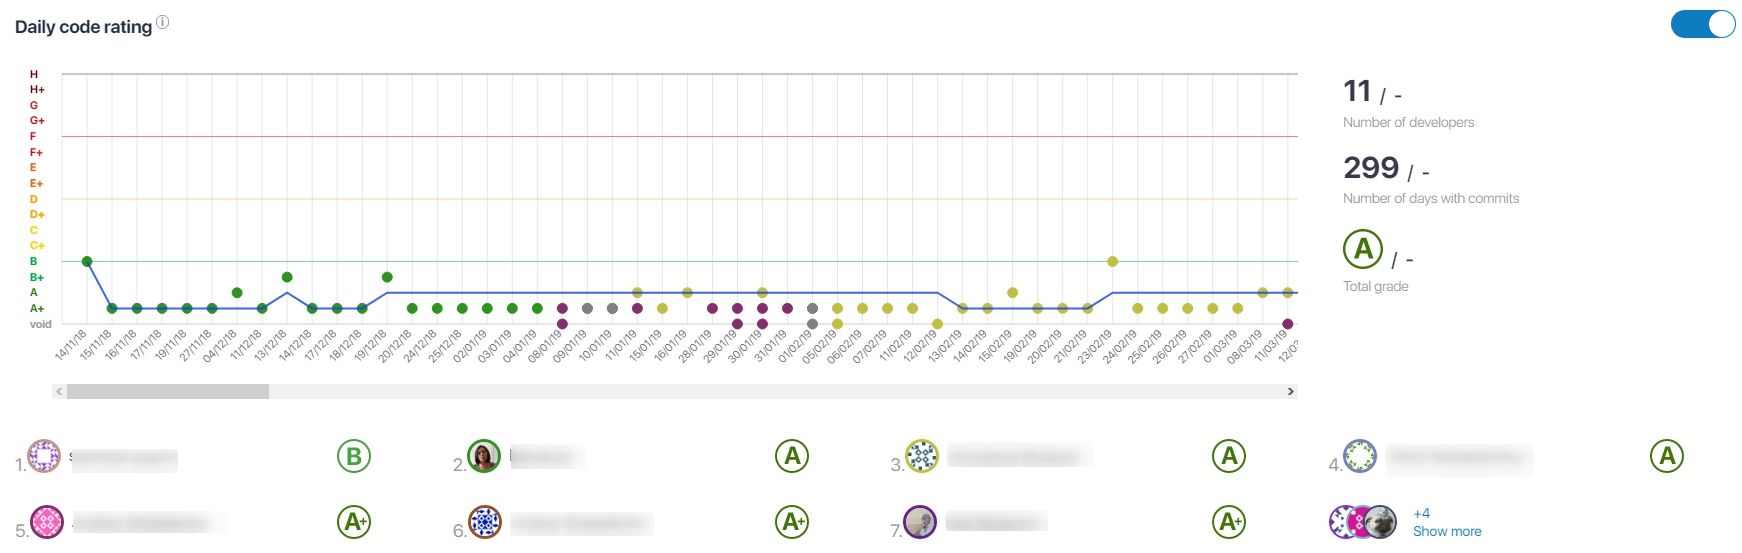 Code Quality Dashboard Daily Code Rating